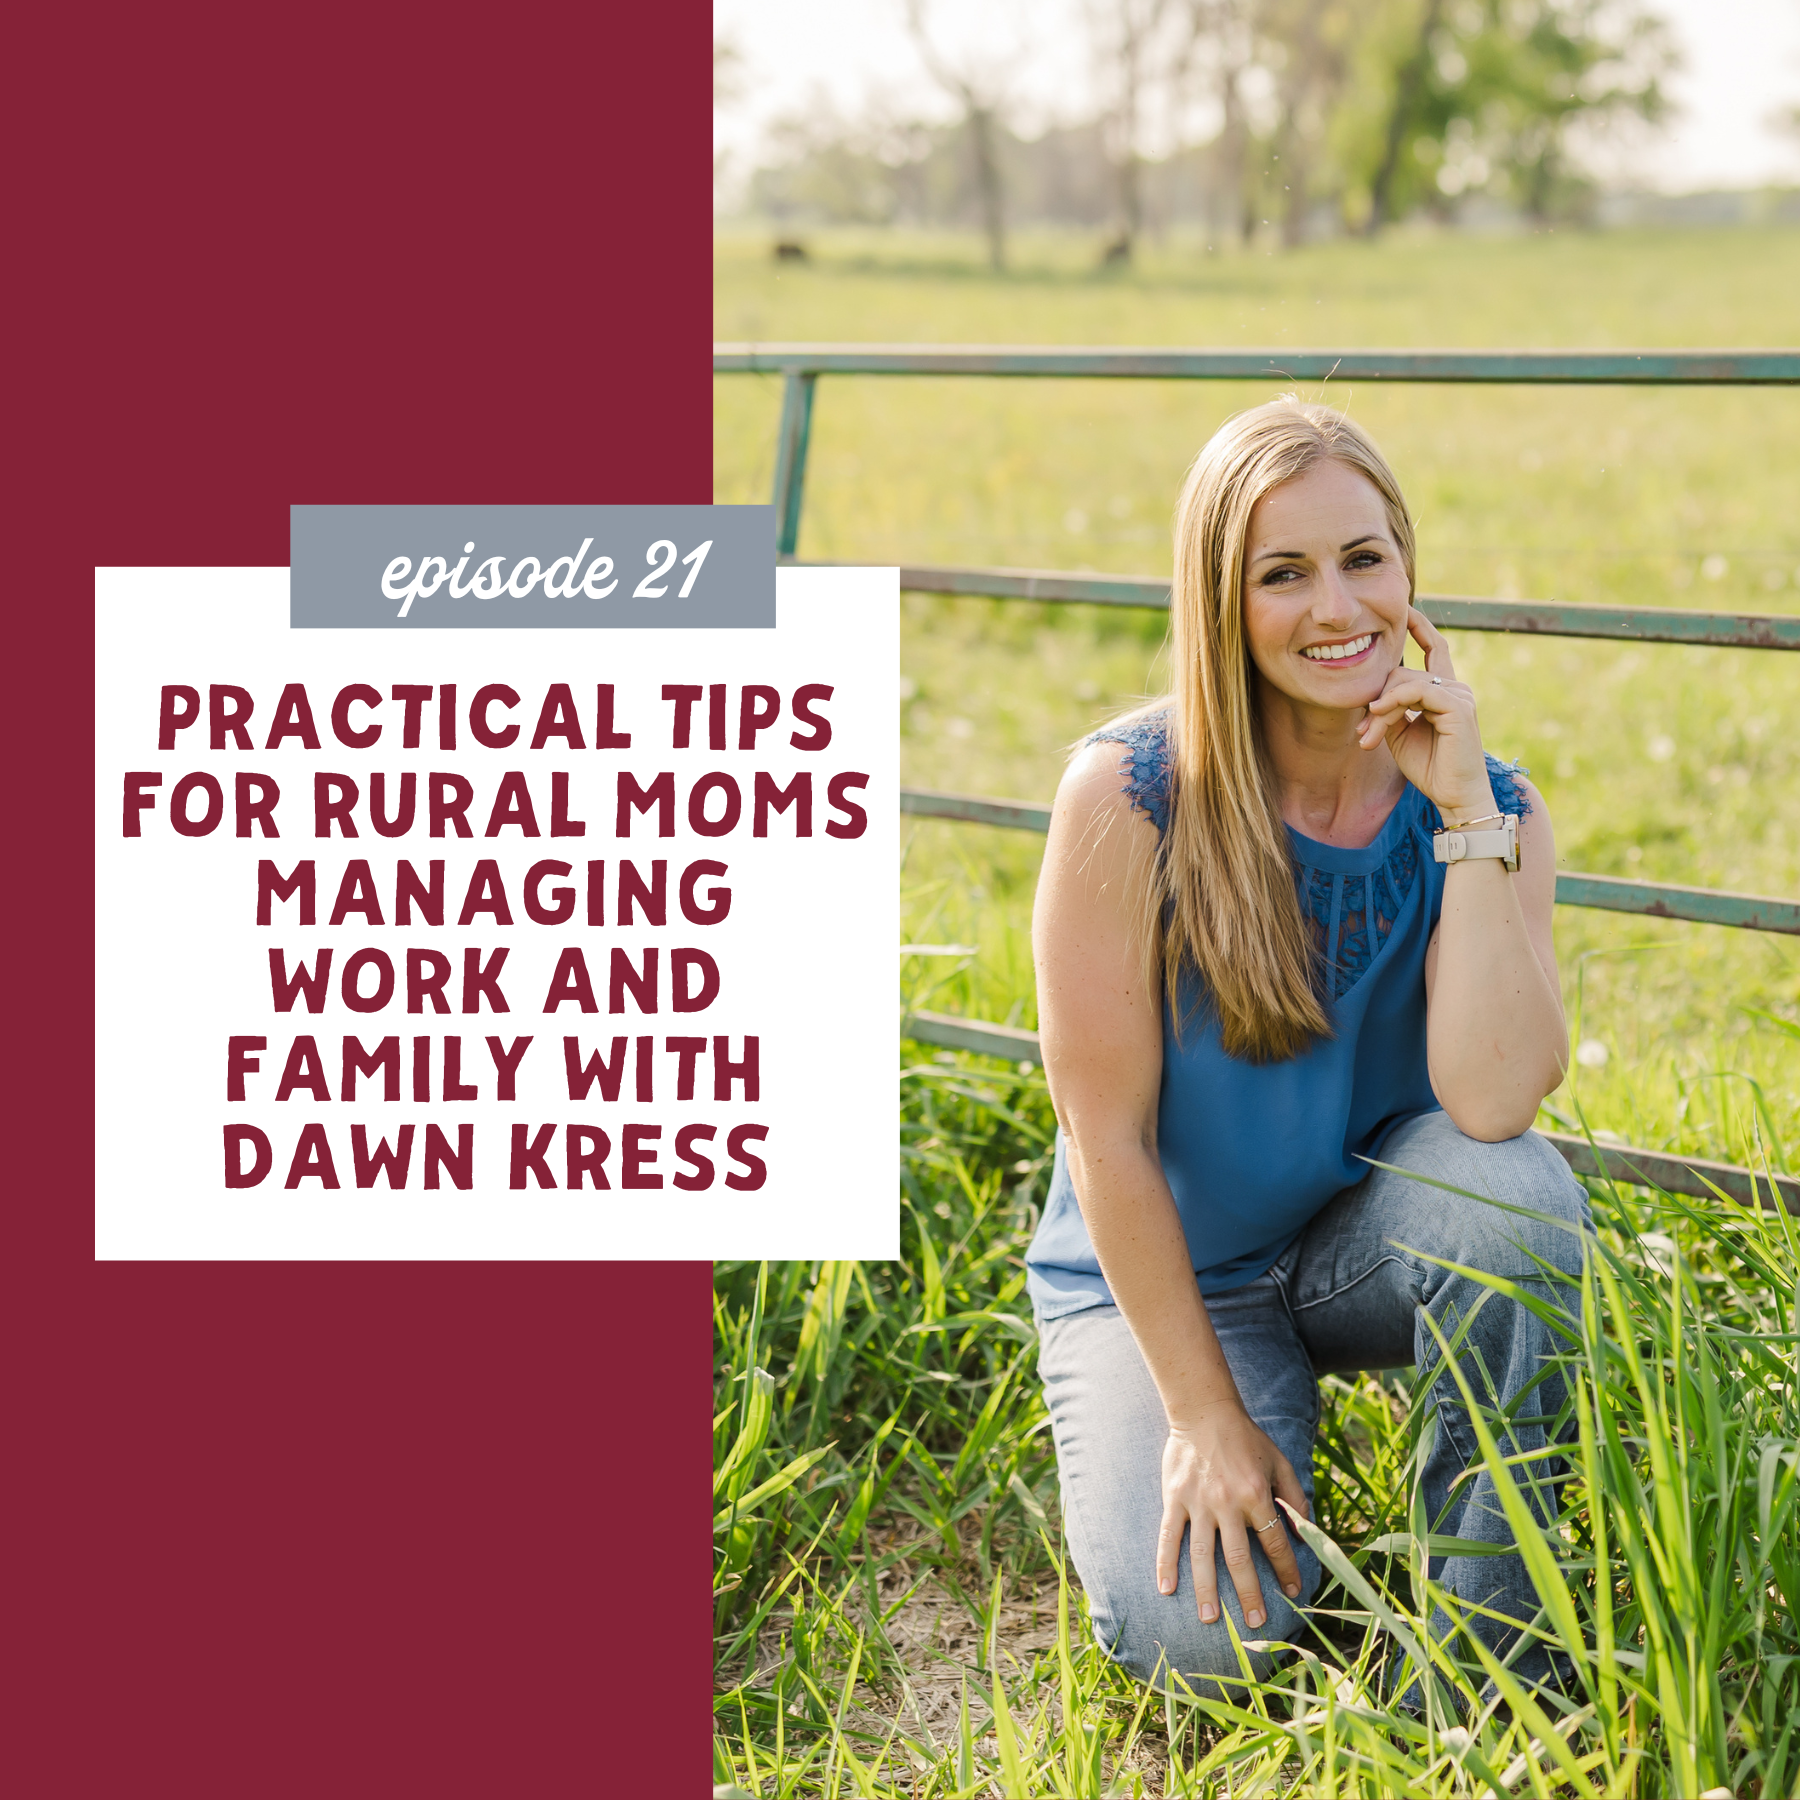 Practical Tips for Rural Moms Managing Work and Family with Dawn Kress [episode 21]